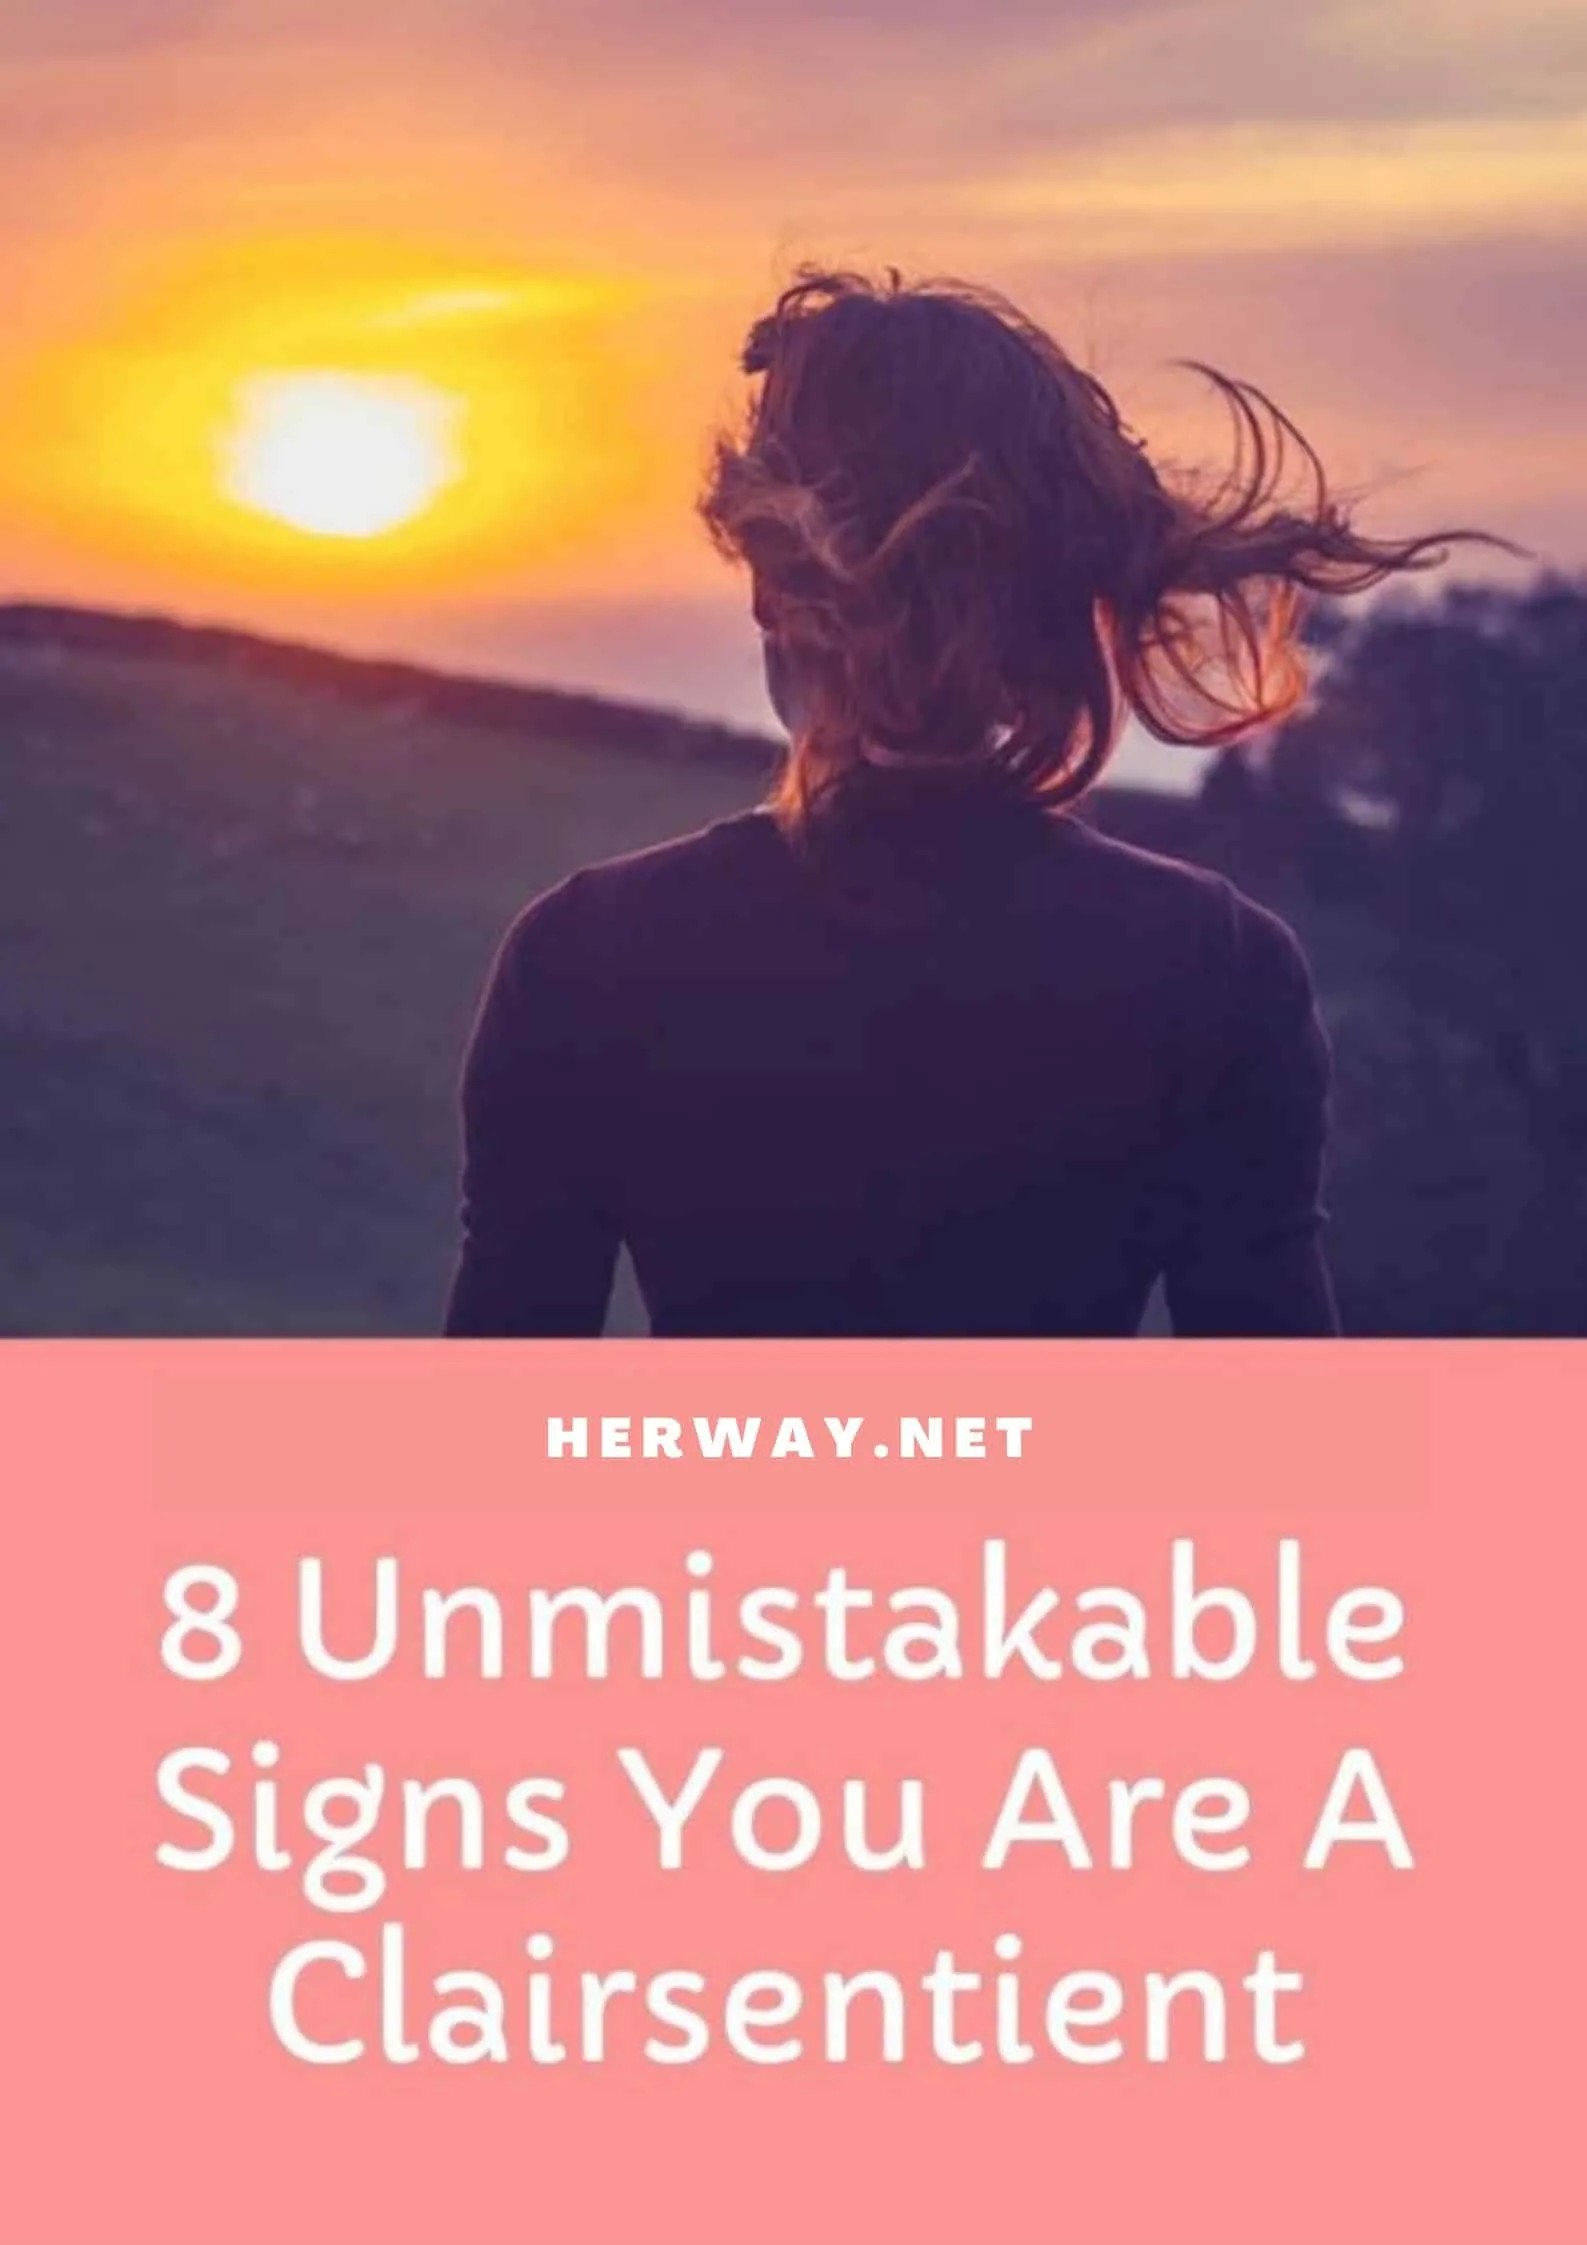 8 Unmistakable Signs You Are A Clairsentient